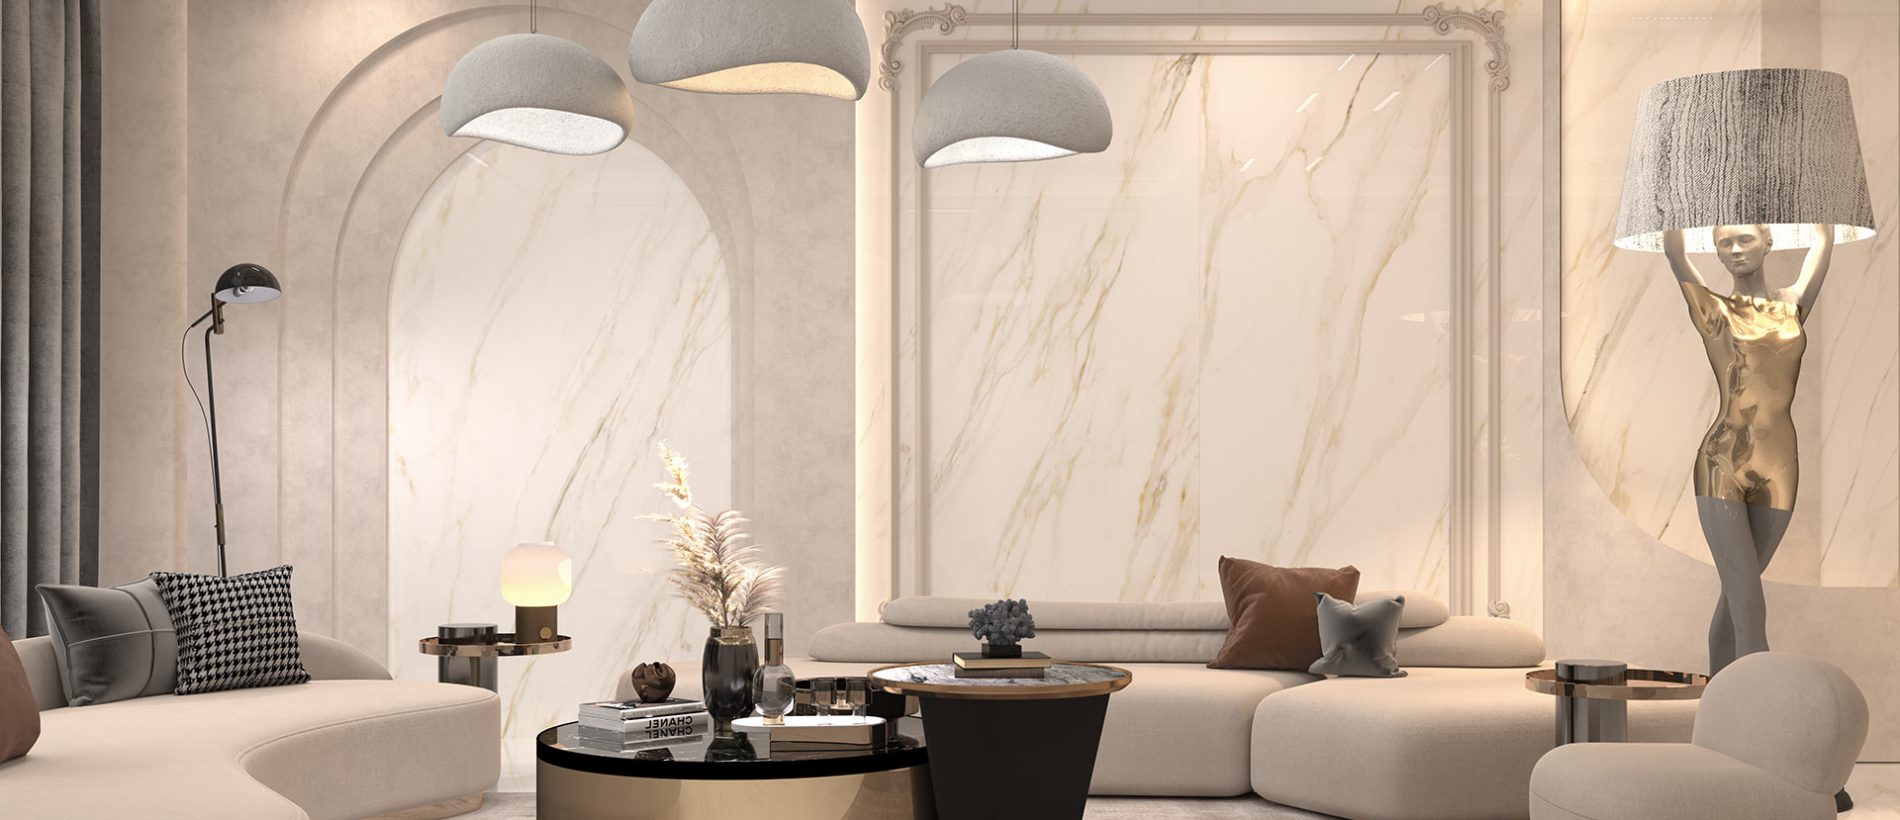 Elegant living room featuring ceramic walls and stylish gold and white decor.